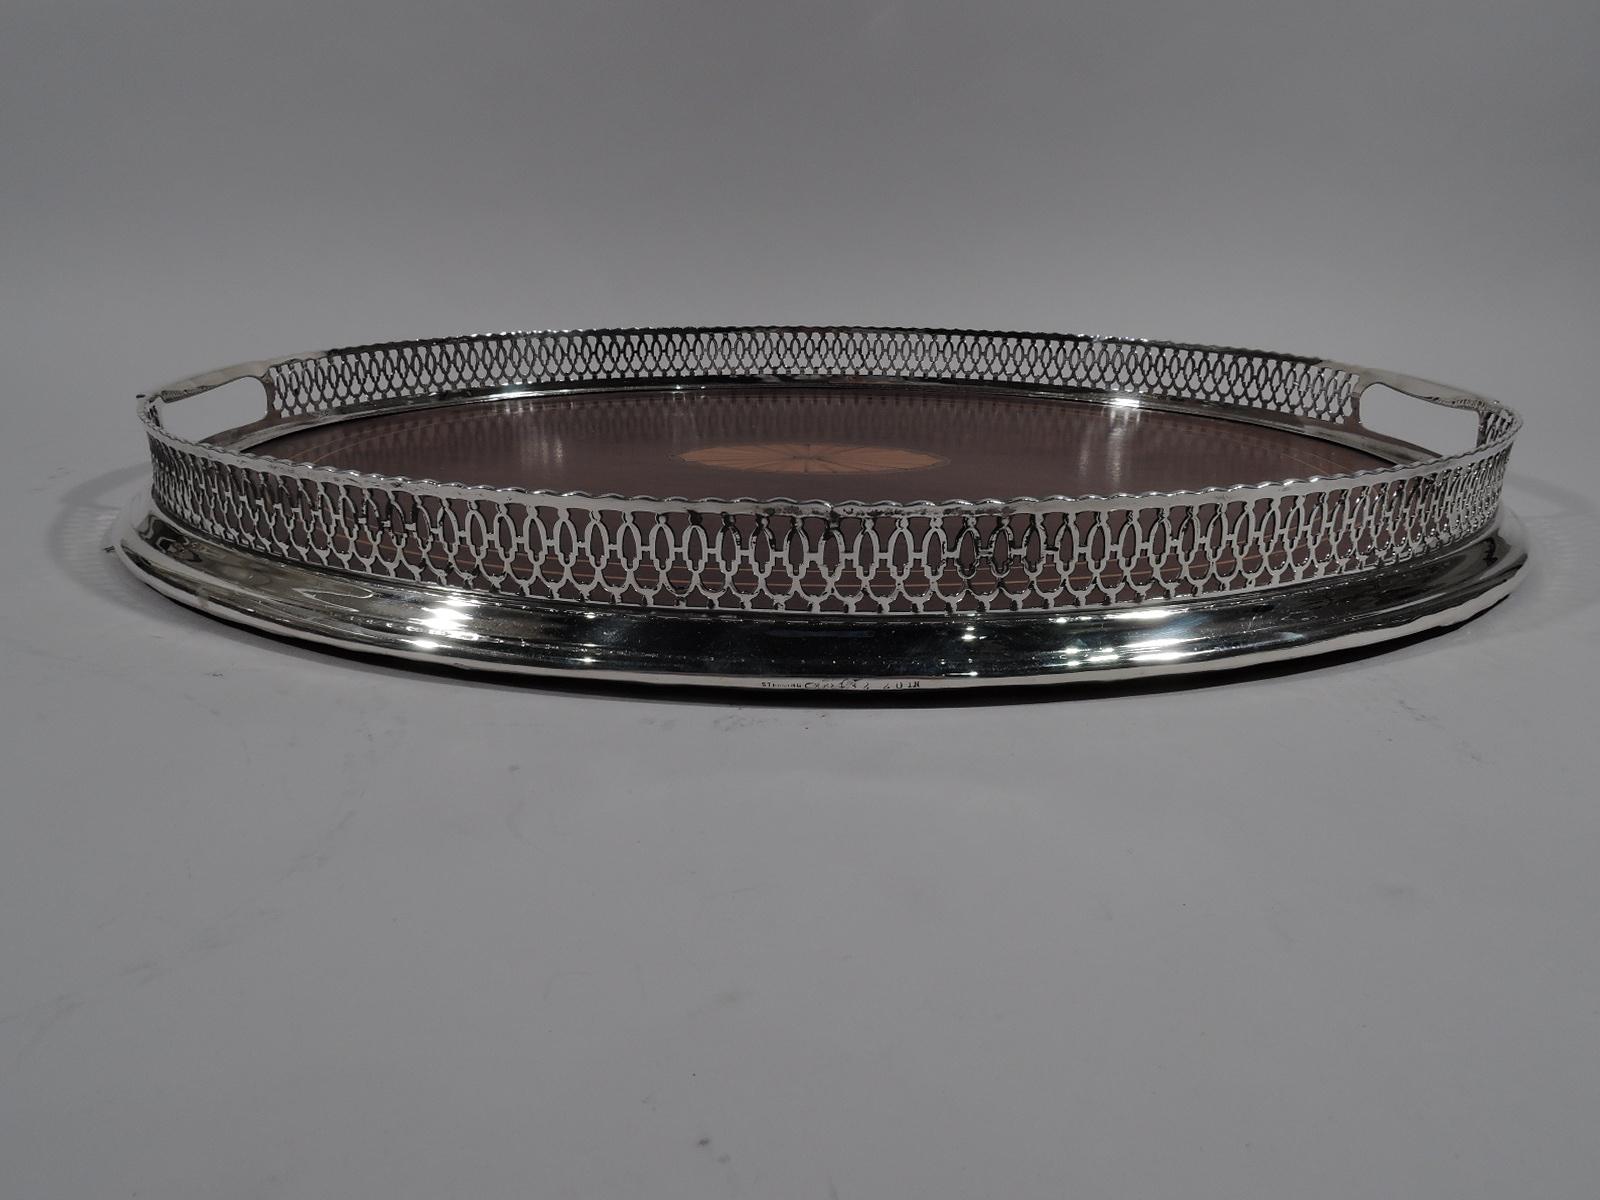 Edwardian tea tray. Made by Dominick & Haff in New York, circa 1910. Oval stained-wood well with marquetry patera and 2 linear borders set in sterling silver frame with pierced geometric gallery sides and spread base. Tubular cutout end handles with